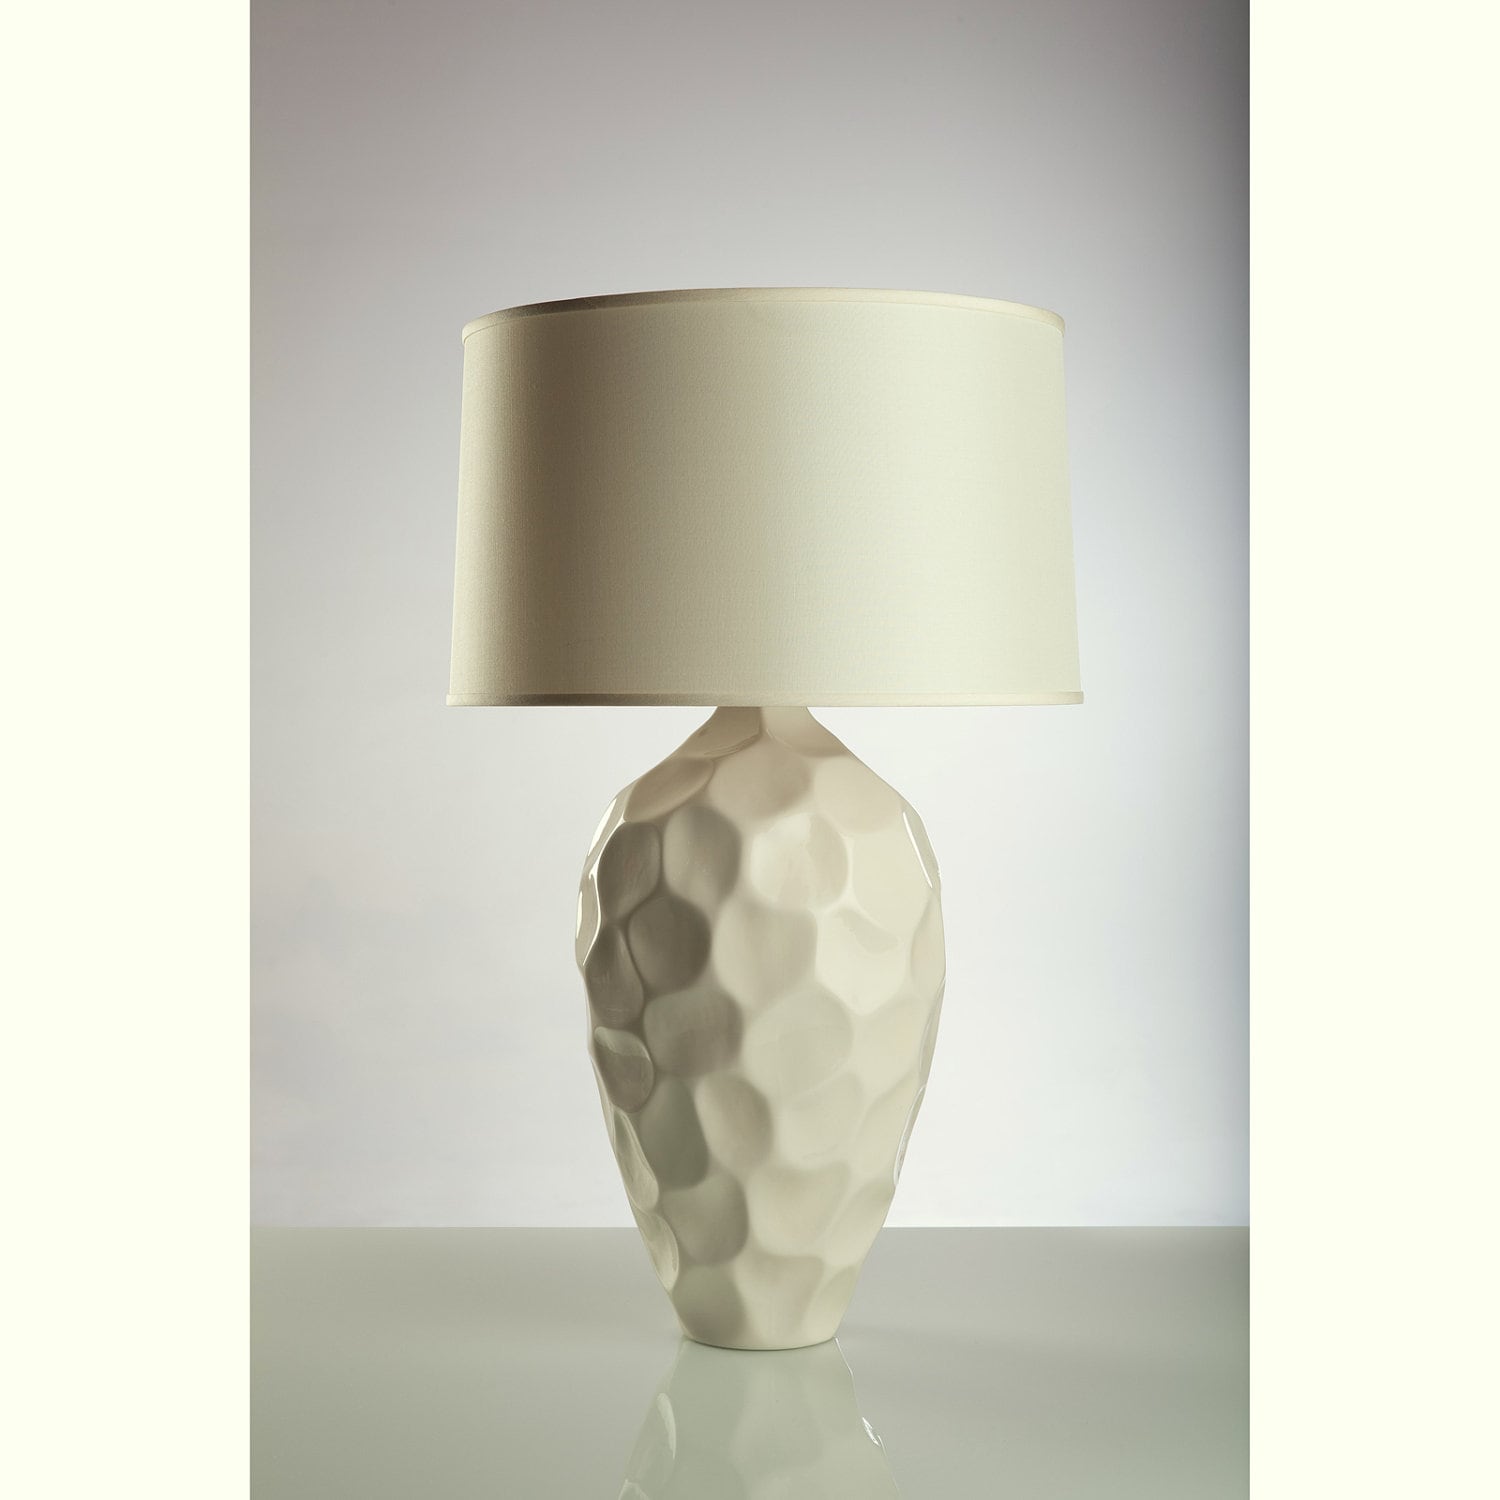 Silk Lamp Shades on Honeycomb Porcelain Lamp With Ivory Silk Shade By Lovinglighting